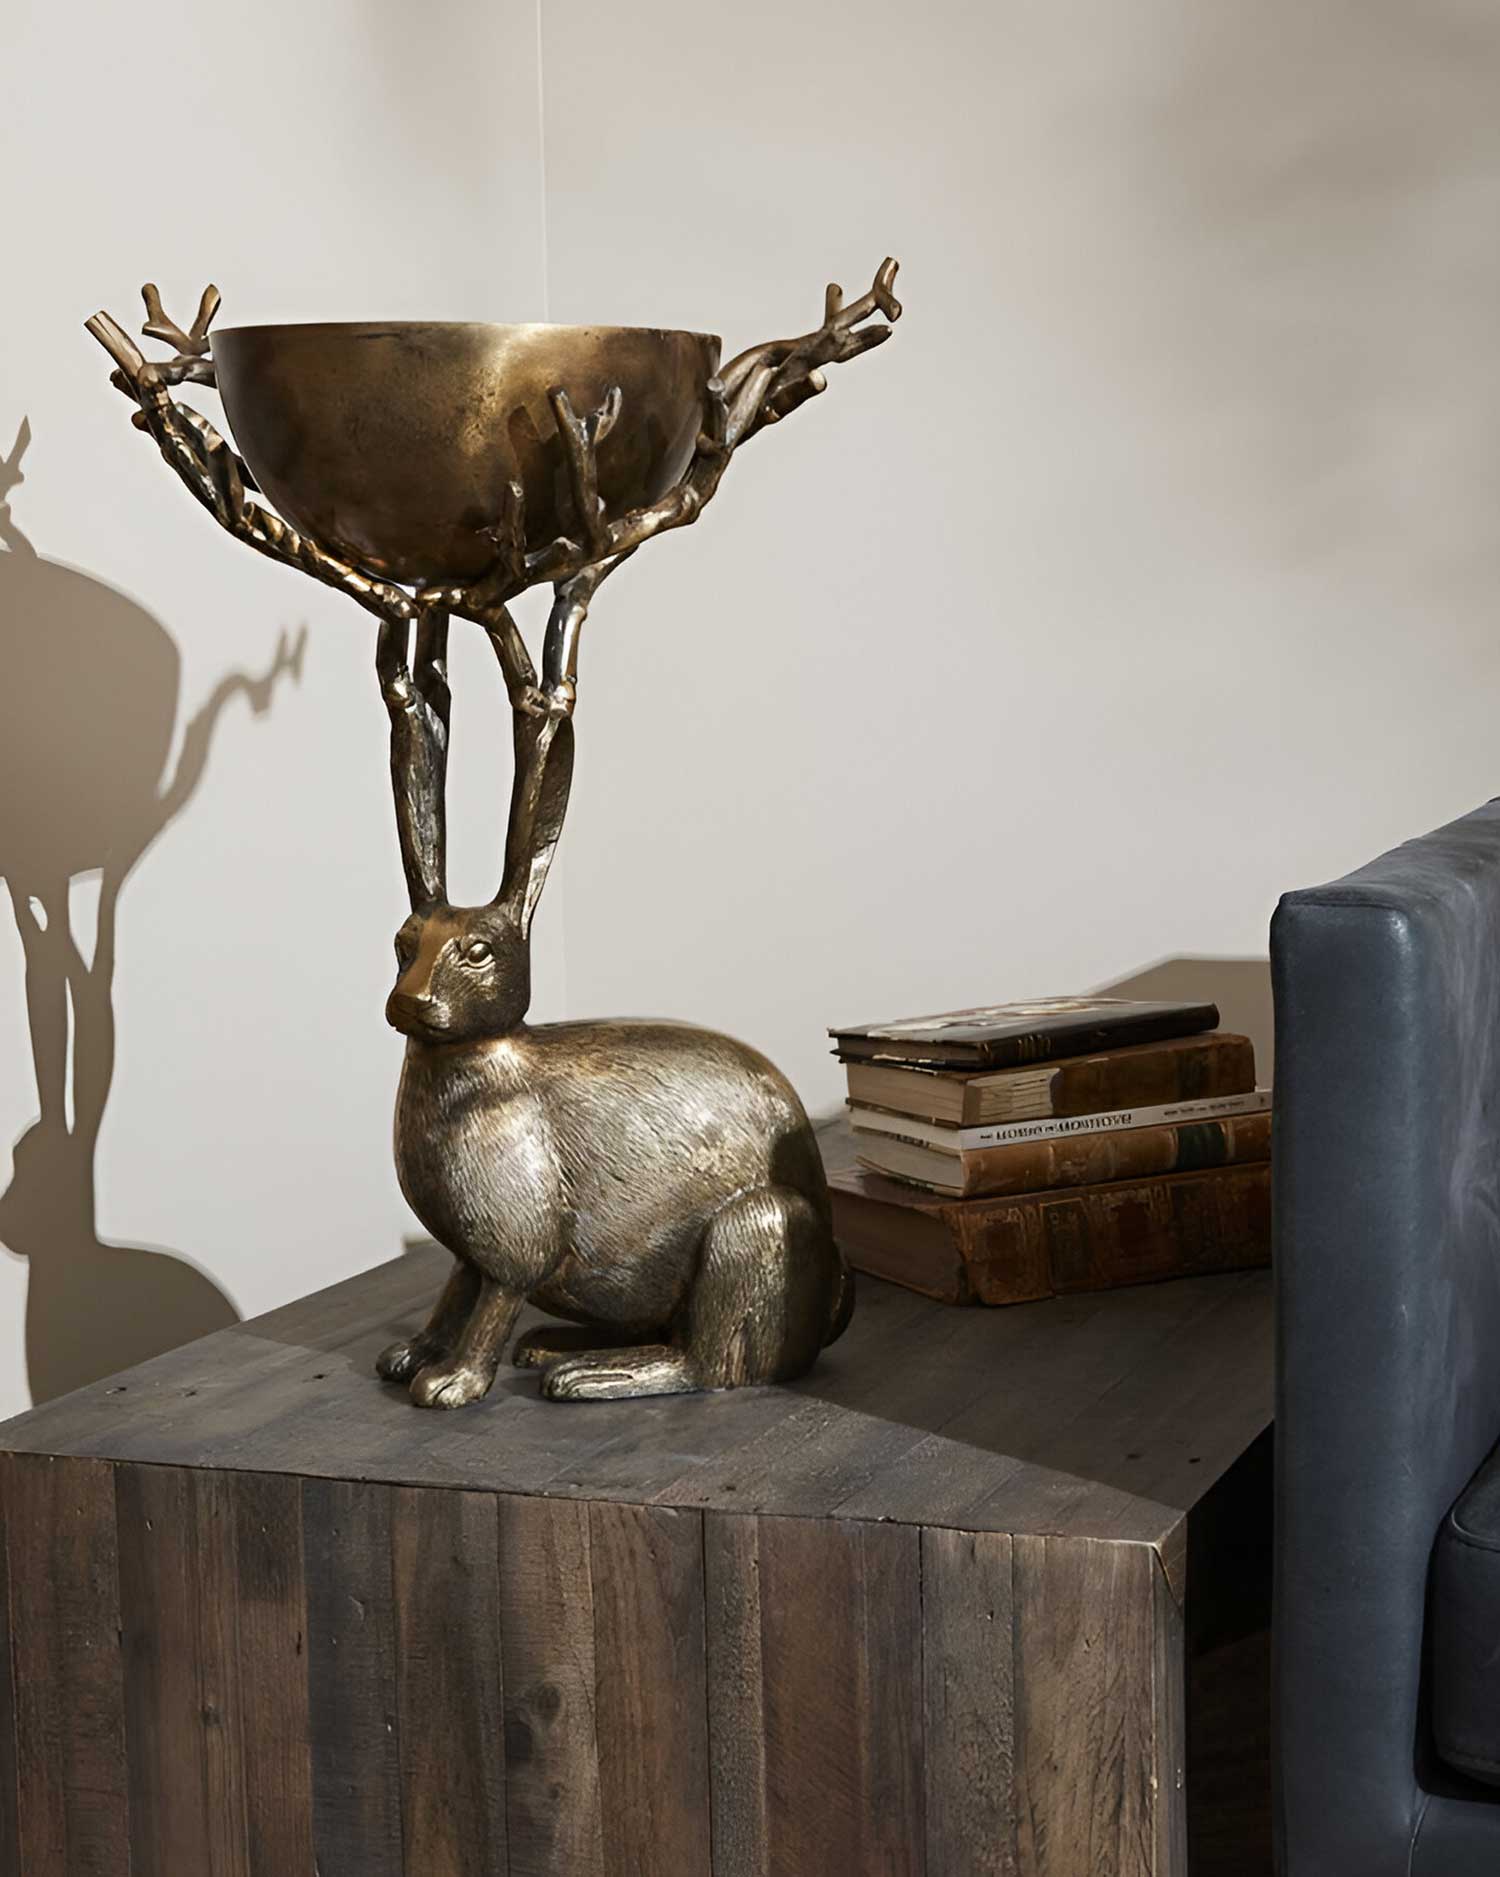 Fantastical Hare Branch Bowl on a small table next to a sofa